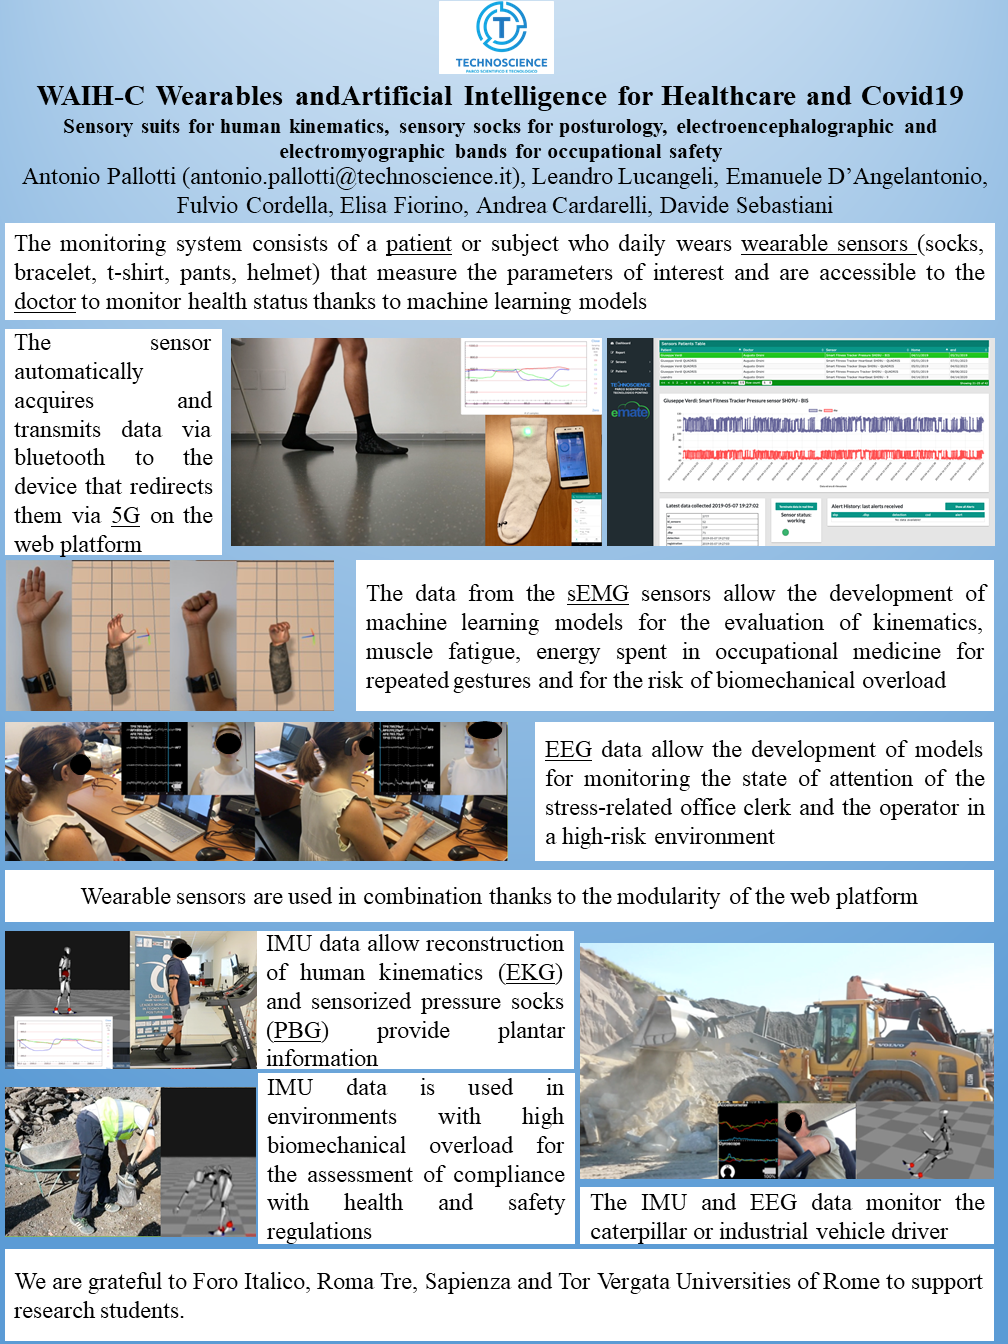 WAIH-C (Wearables and Artificial Intelligence for Healthcare and Covid-19)